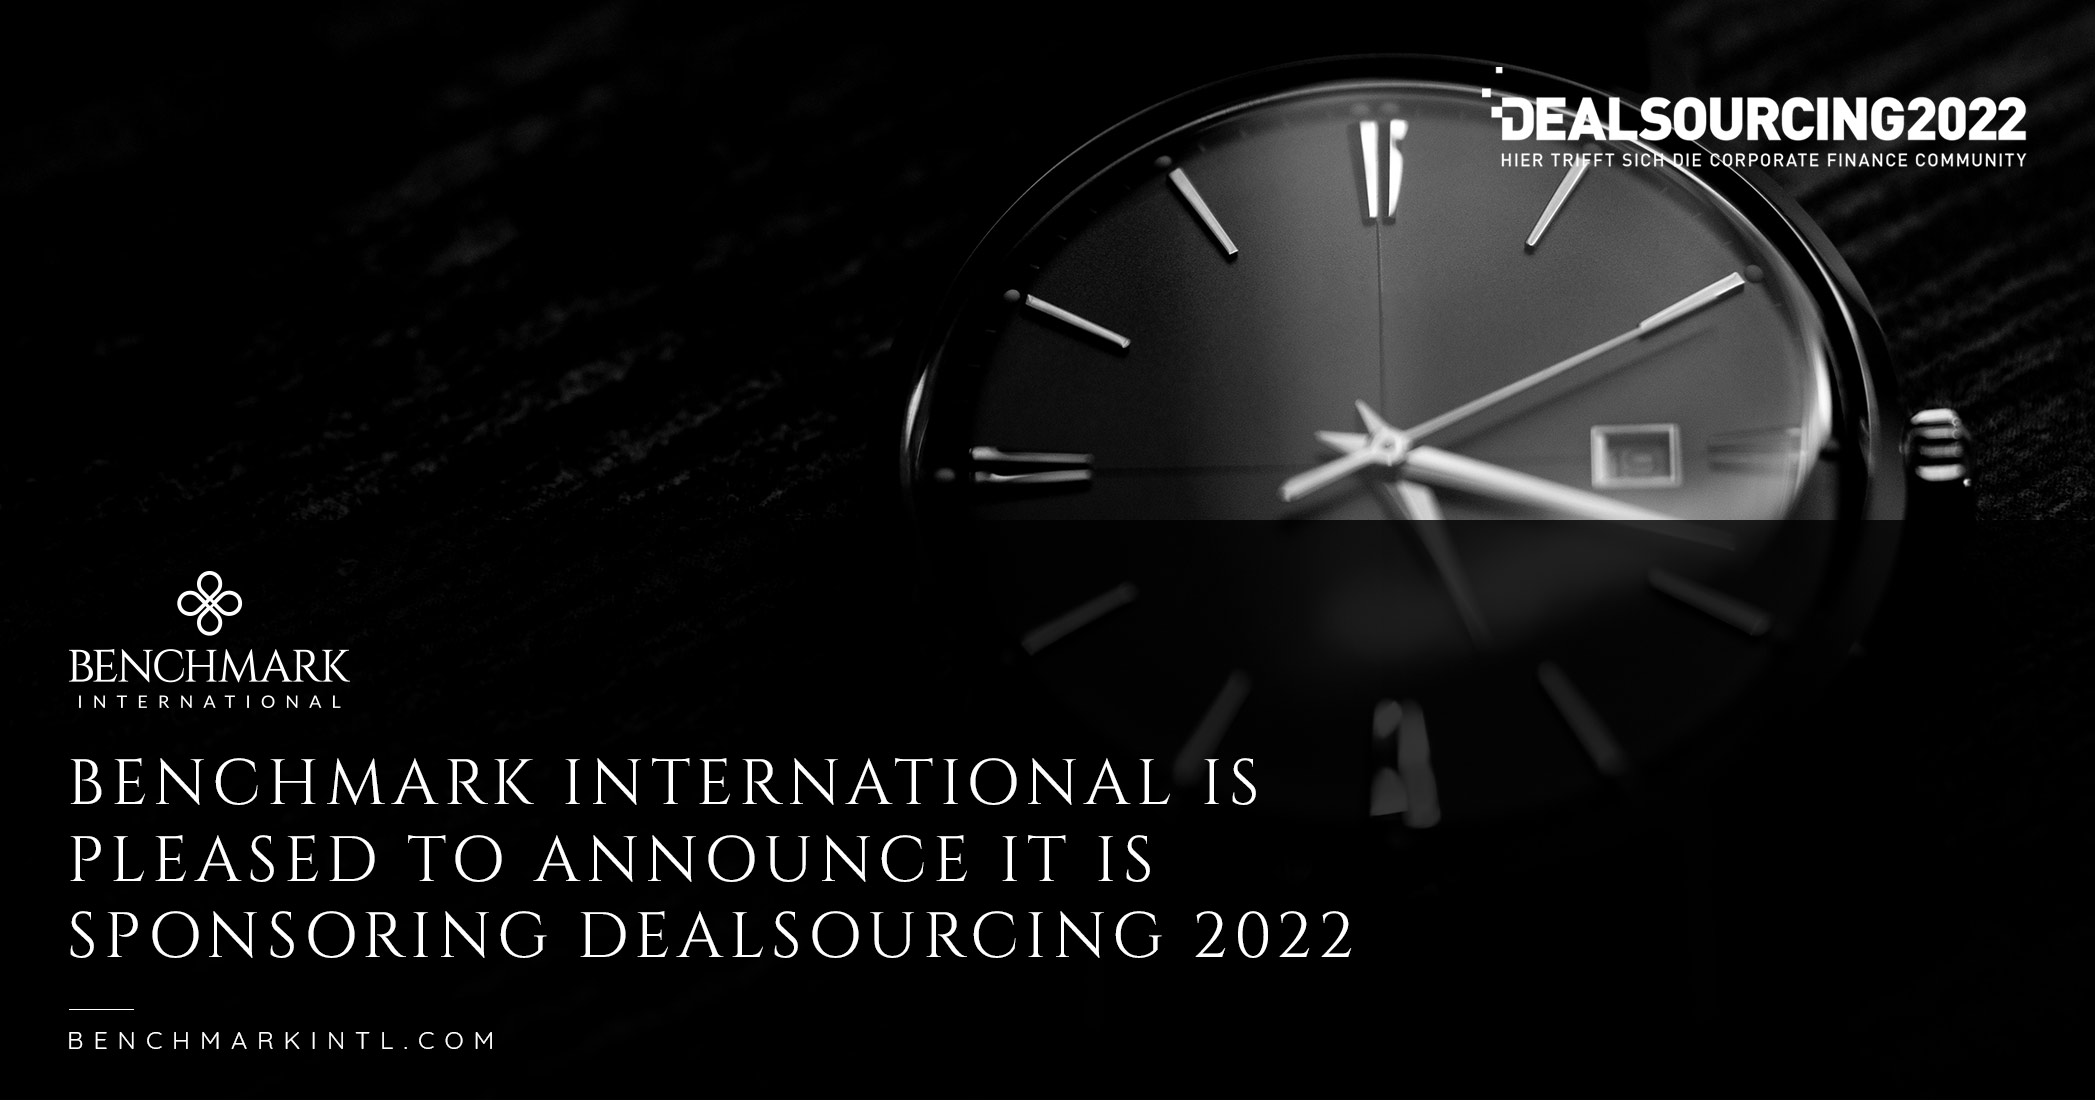 Benchmark International is Pleased to Announce it is Sponsoring DEALSOURCING 2022